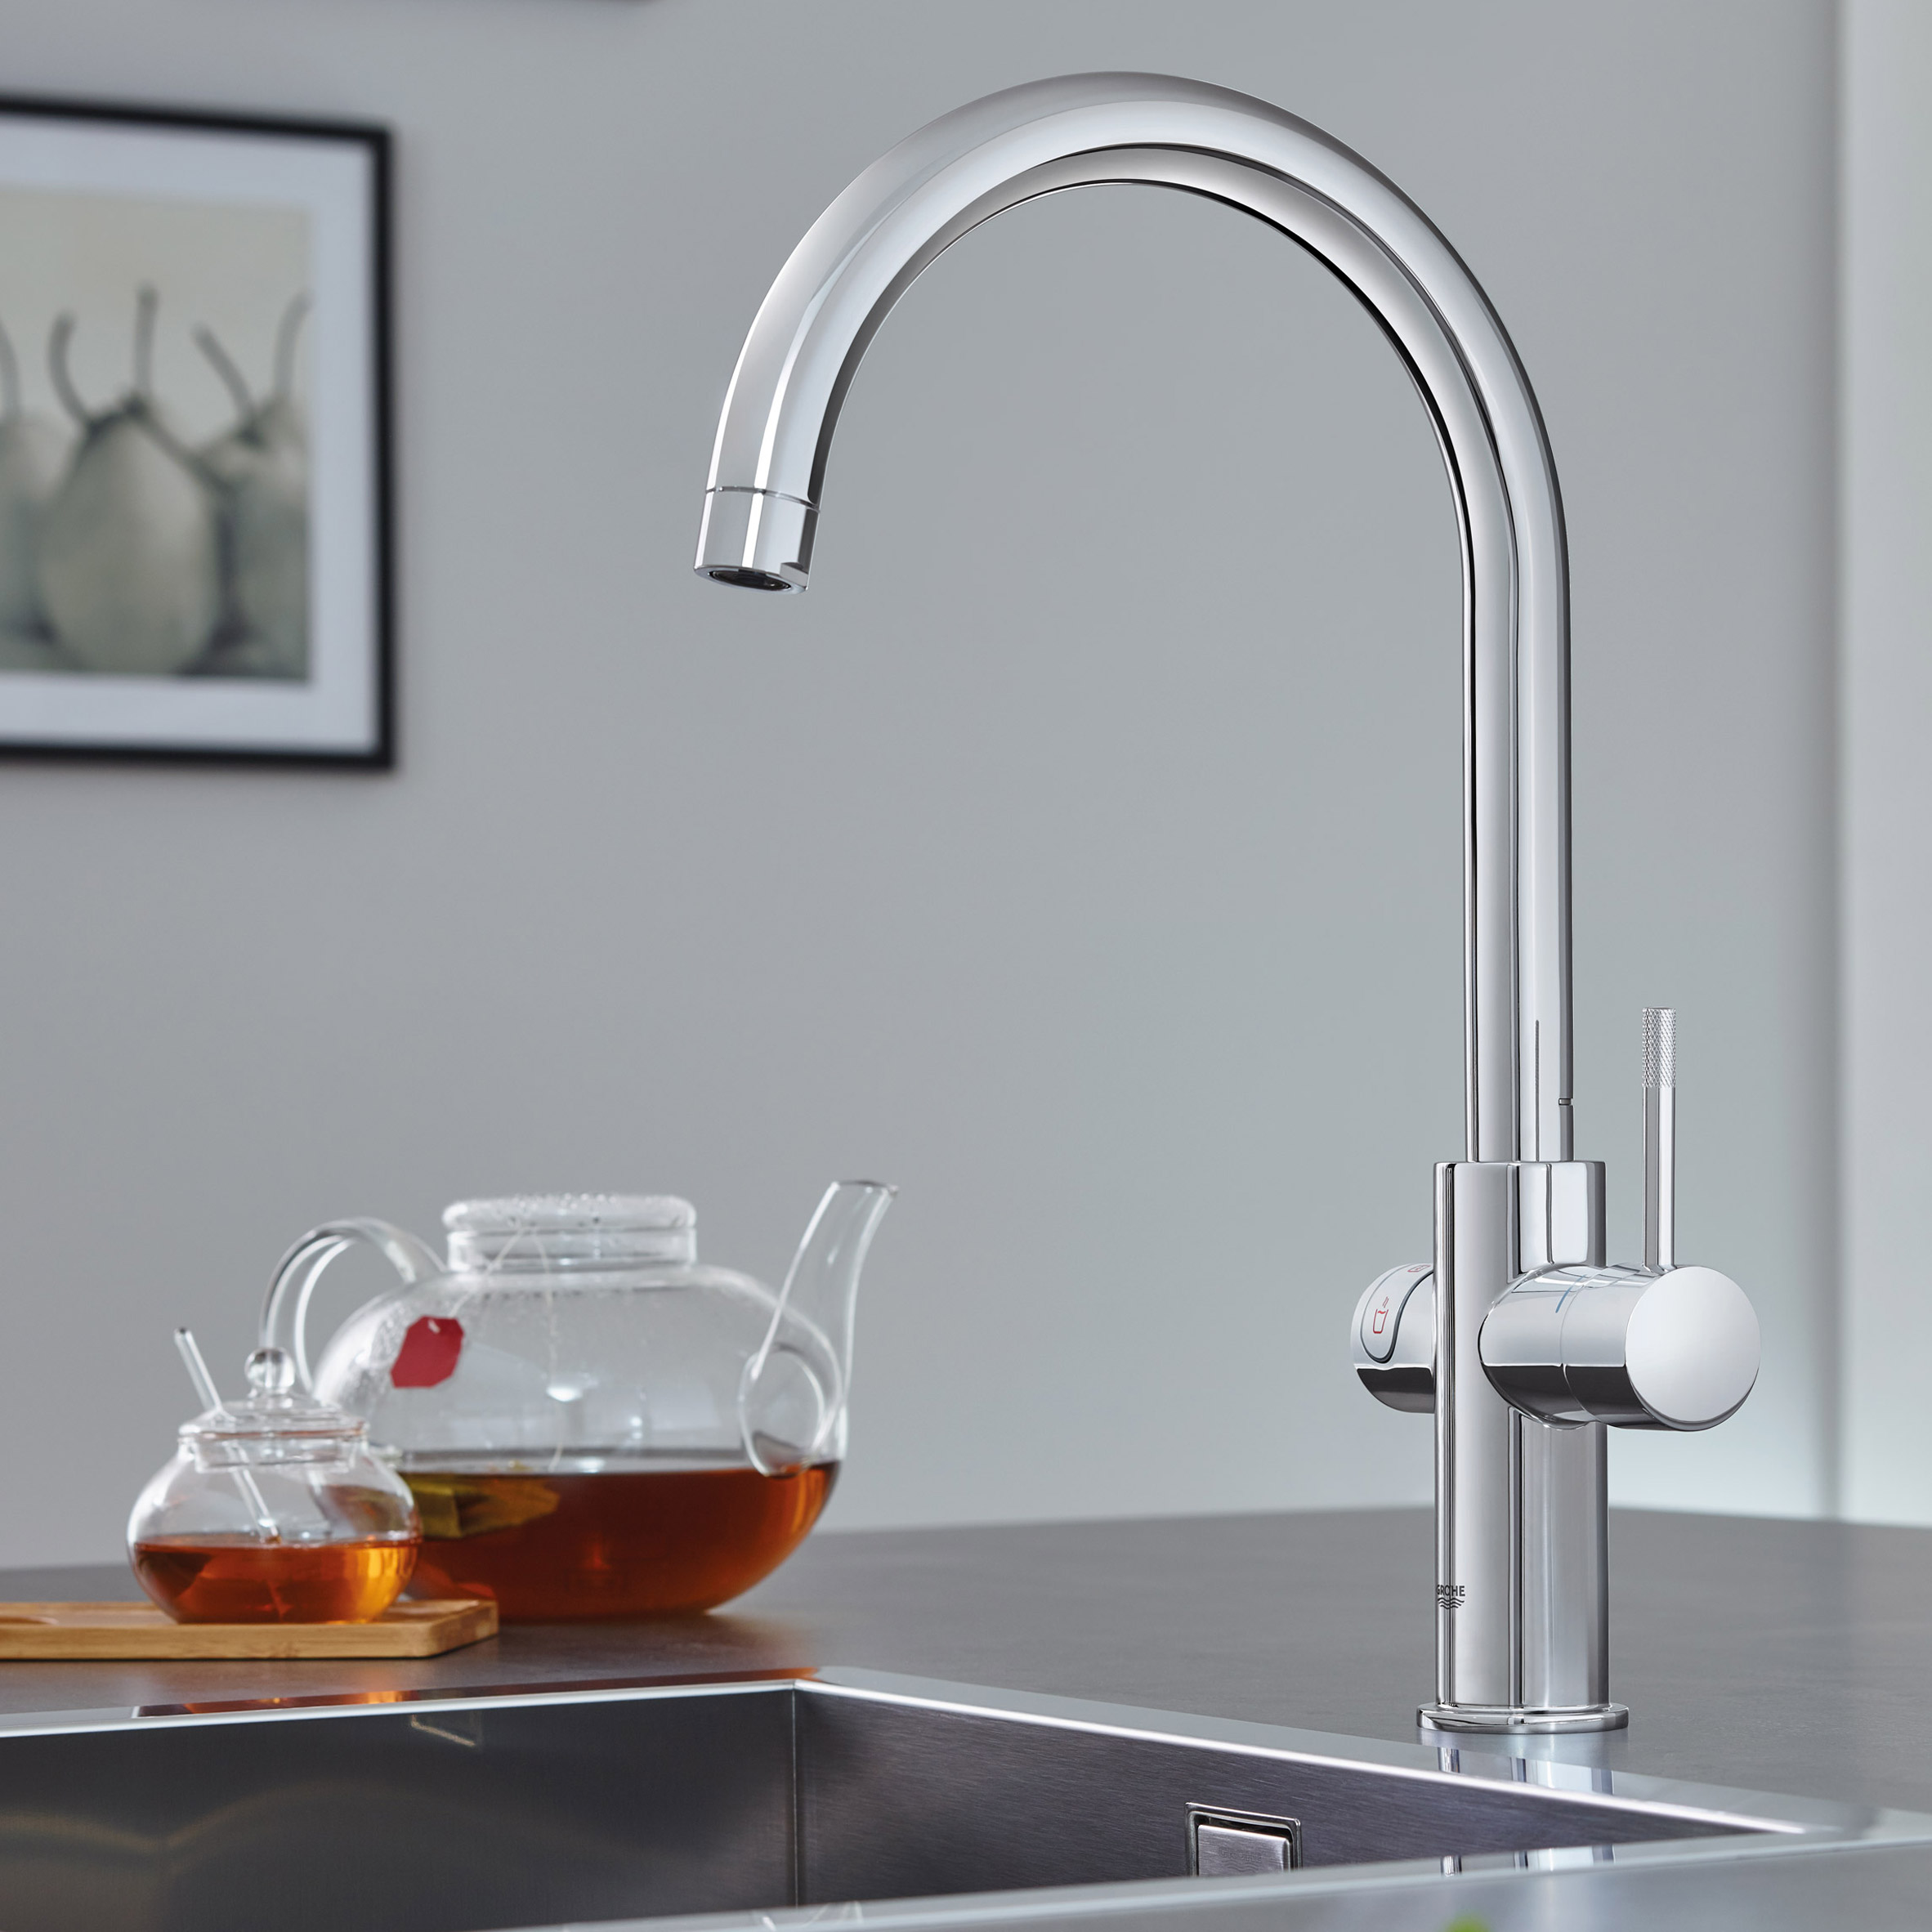 Grohe's Blue Home Red taps provide instant boiling or sparkling water